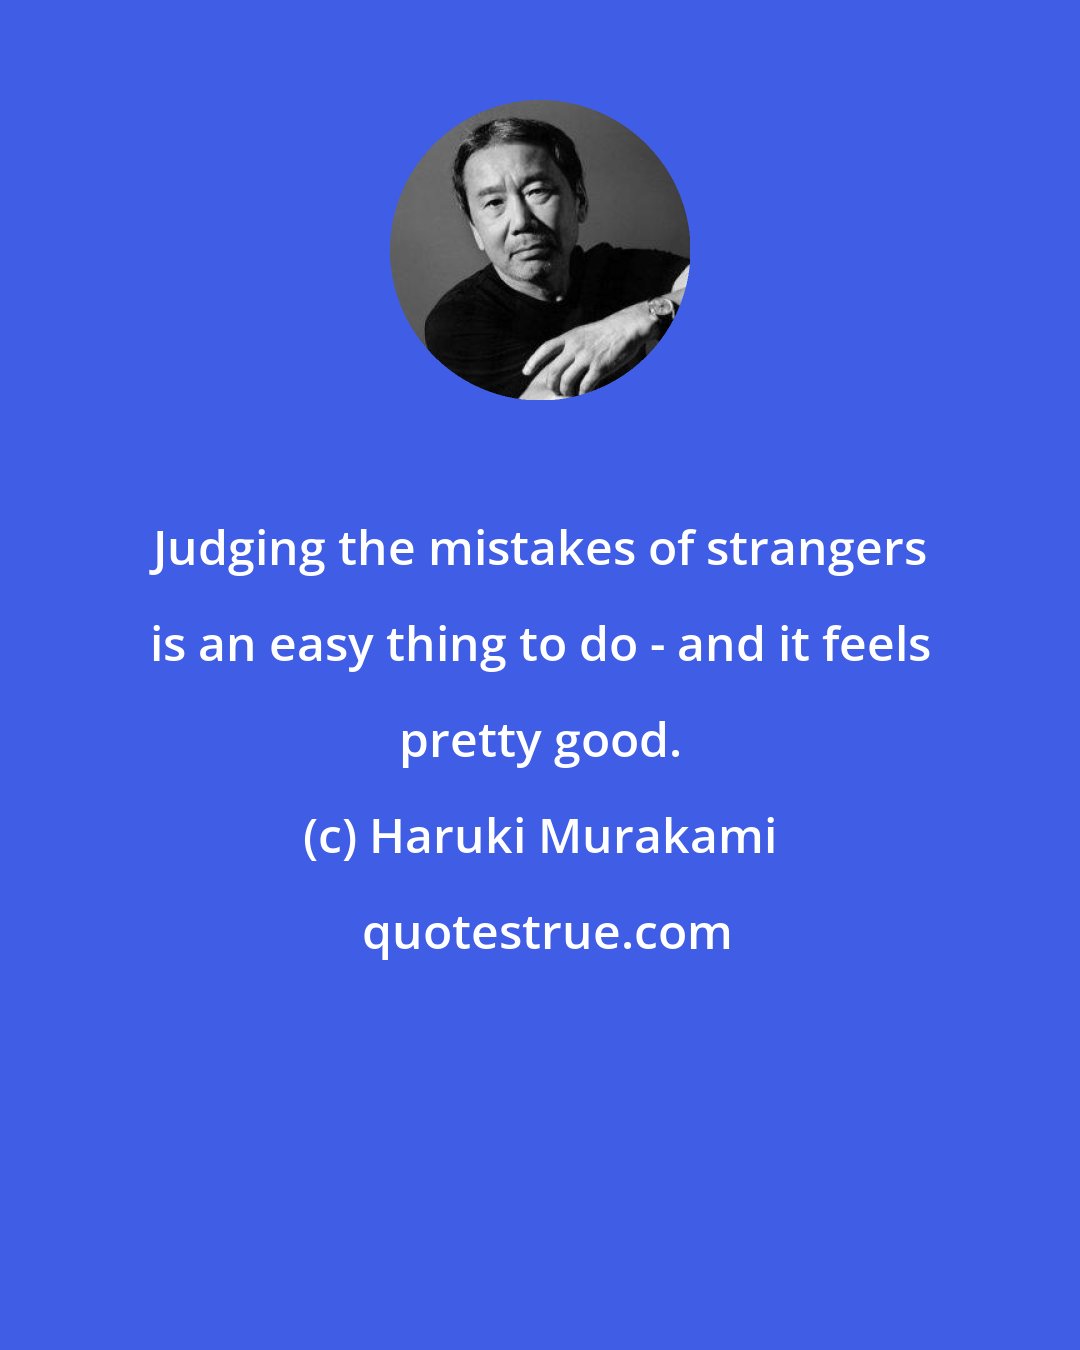 Haruki Murakami: Judging the mistakes of strangers is an easy thing to do - and it feels pretty good.